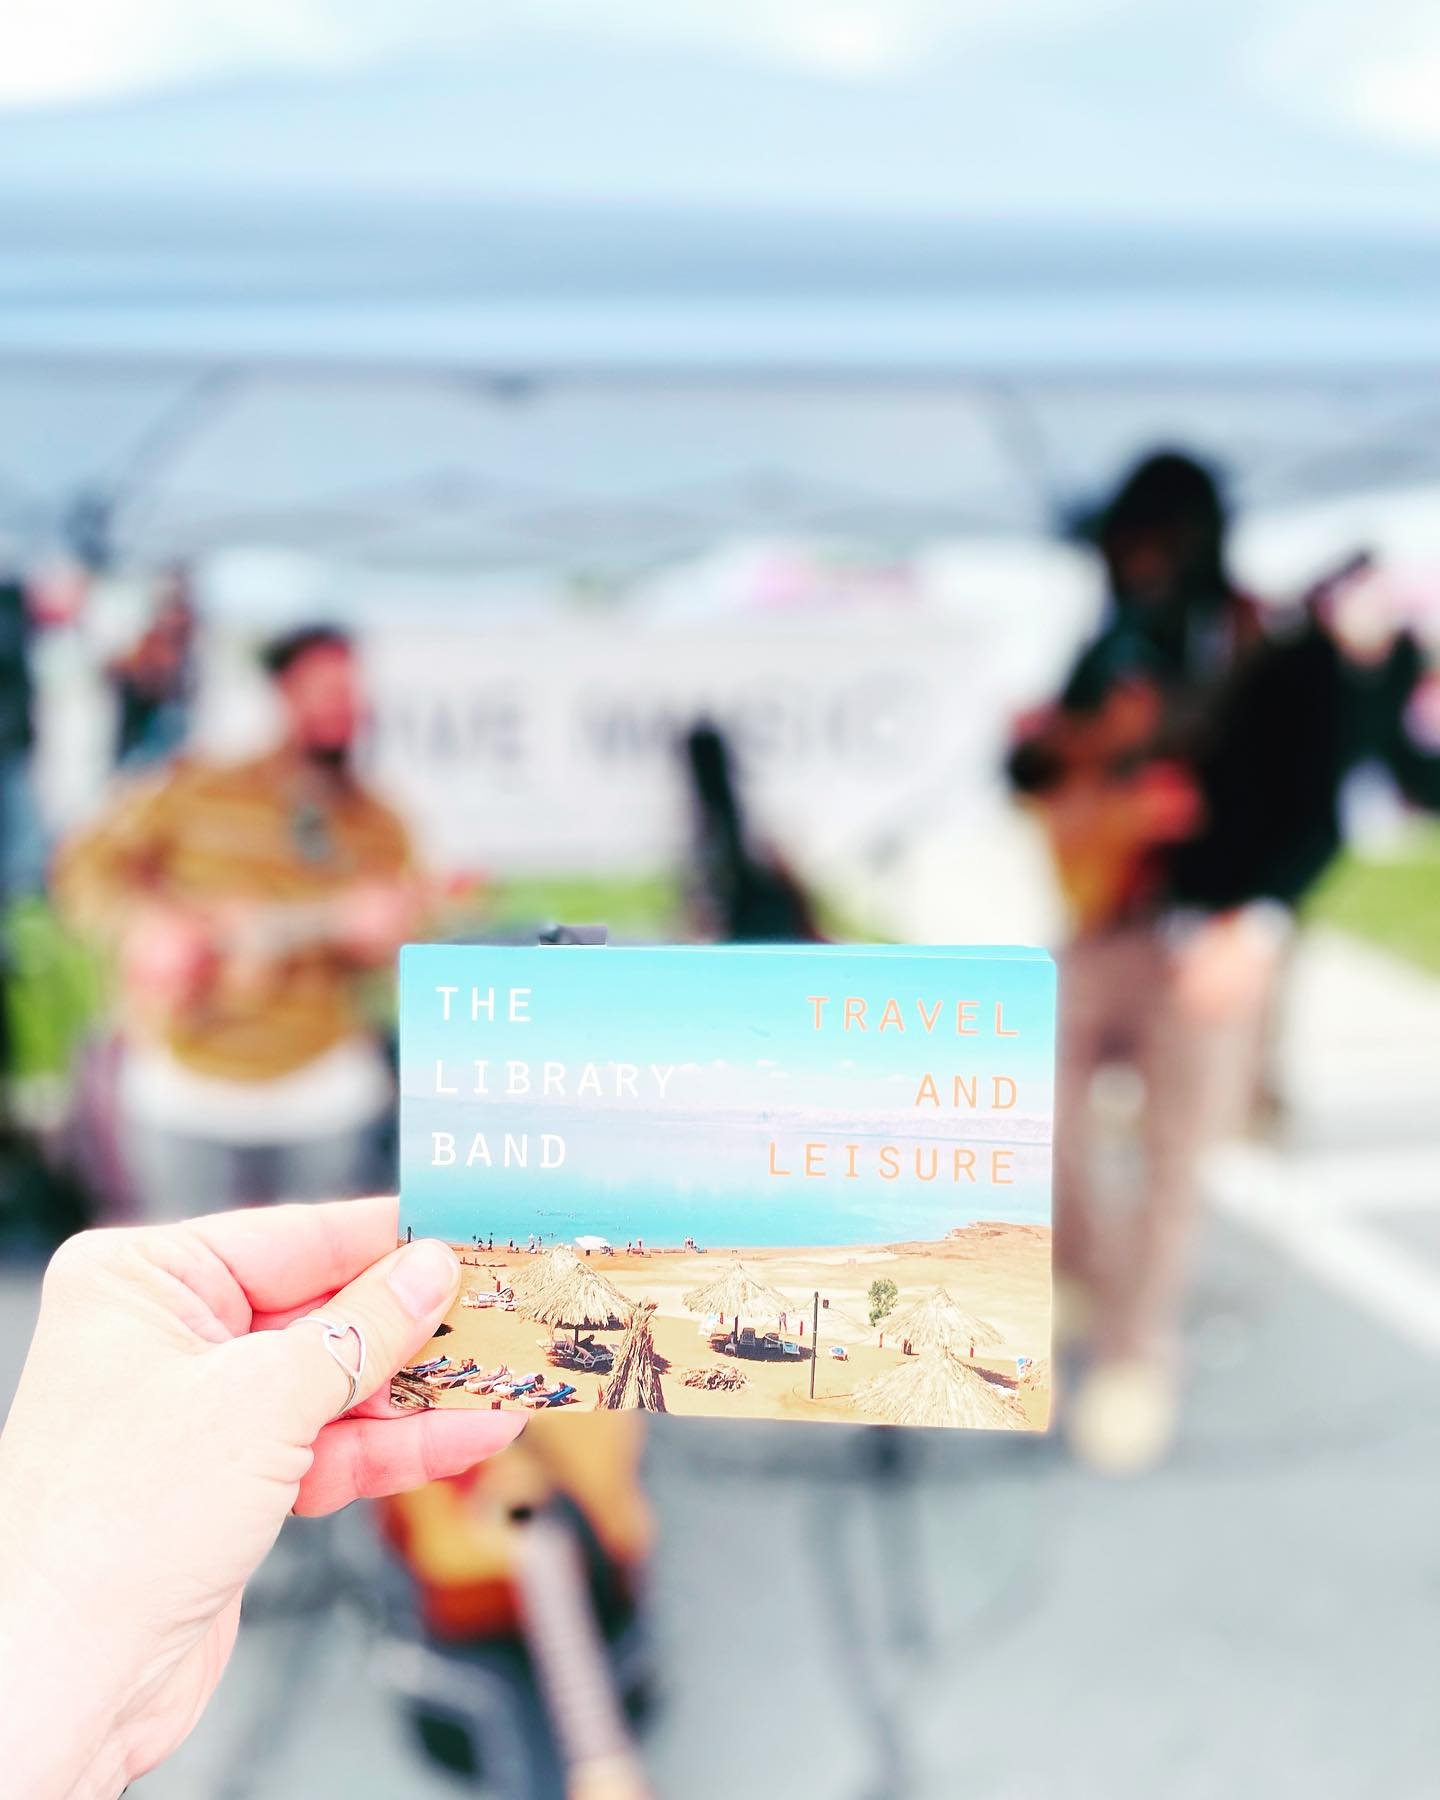 Come for live music. Today! 💐💖☀️🎵 @libraryband 
Every Sunday. 10-2. @beaconfarmersmarket Voted BEST FARMERS&rsquo; MARKET by @hudsonvalleymag

#BeaconFarmersMarket #CommunityStrong #farmersmarkets #thingstodoinbeacon #thingstodohudsonvalley #nycda